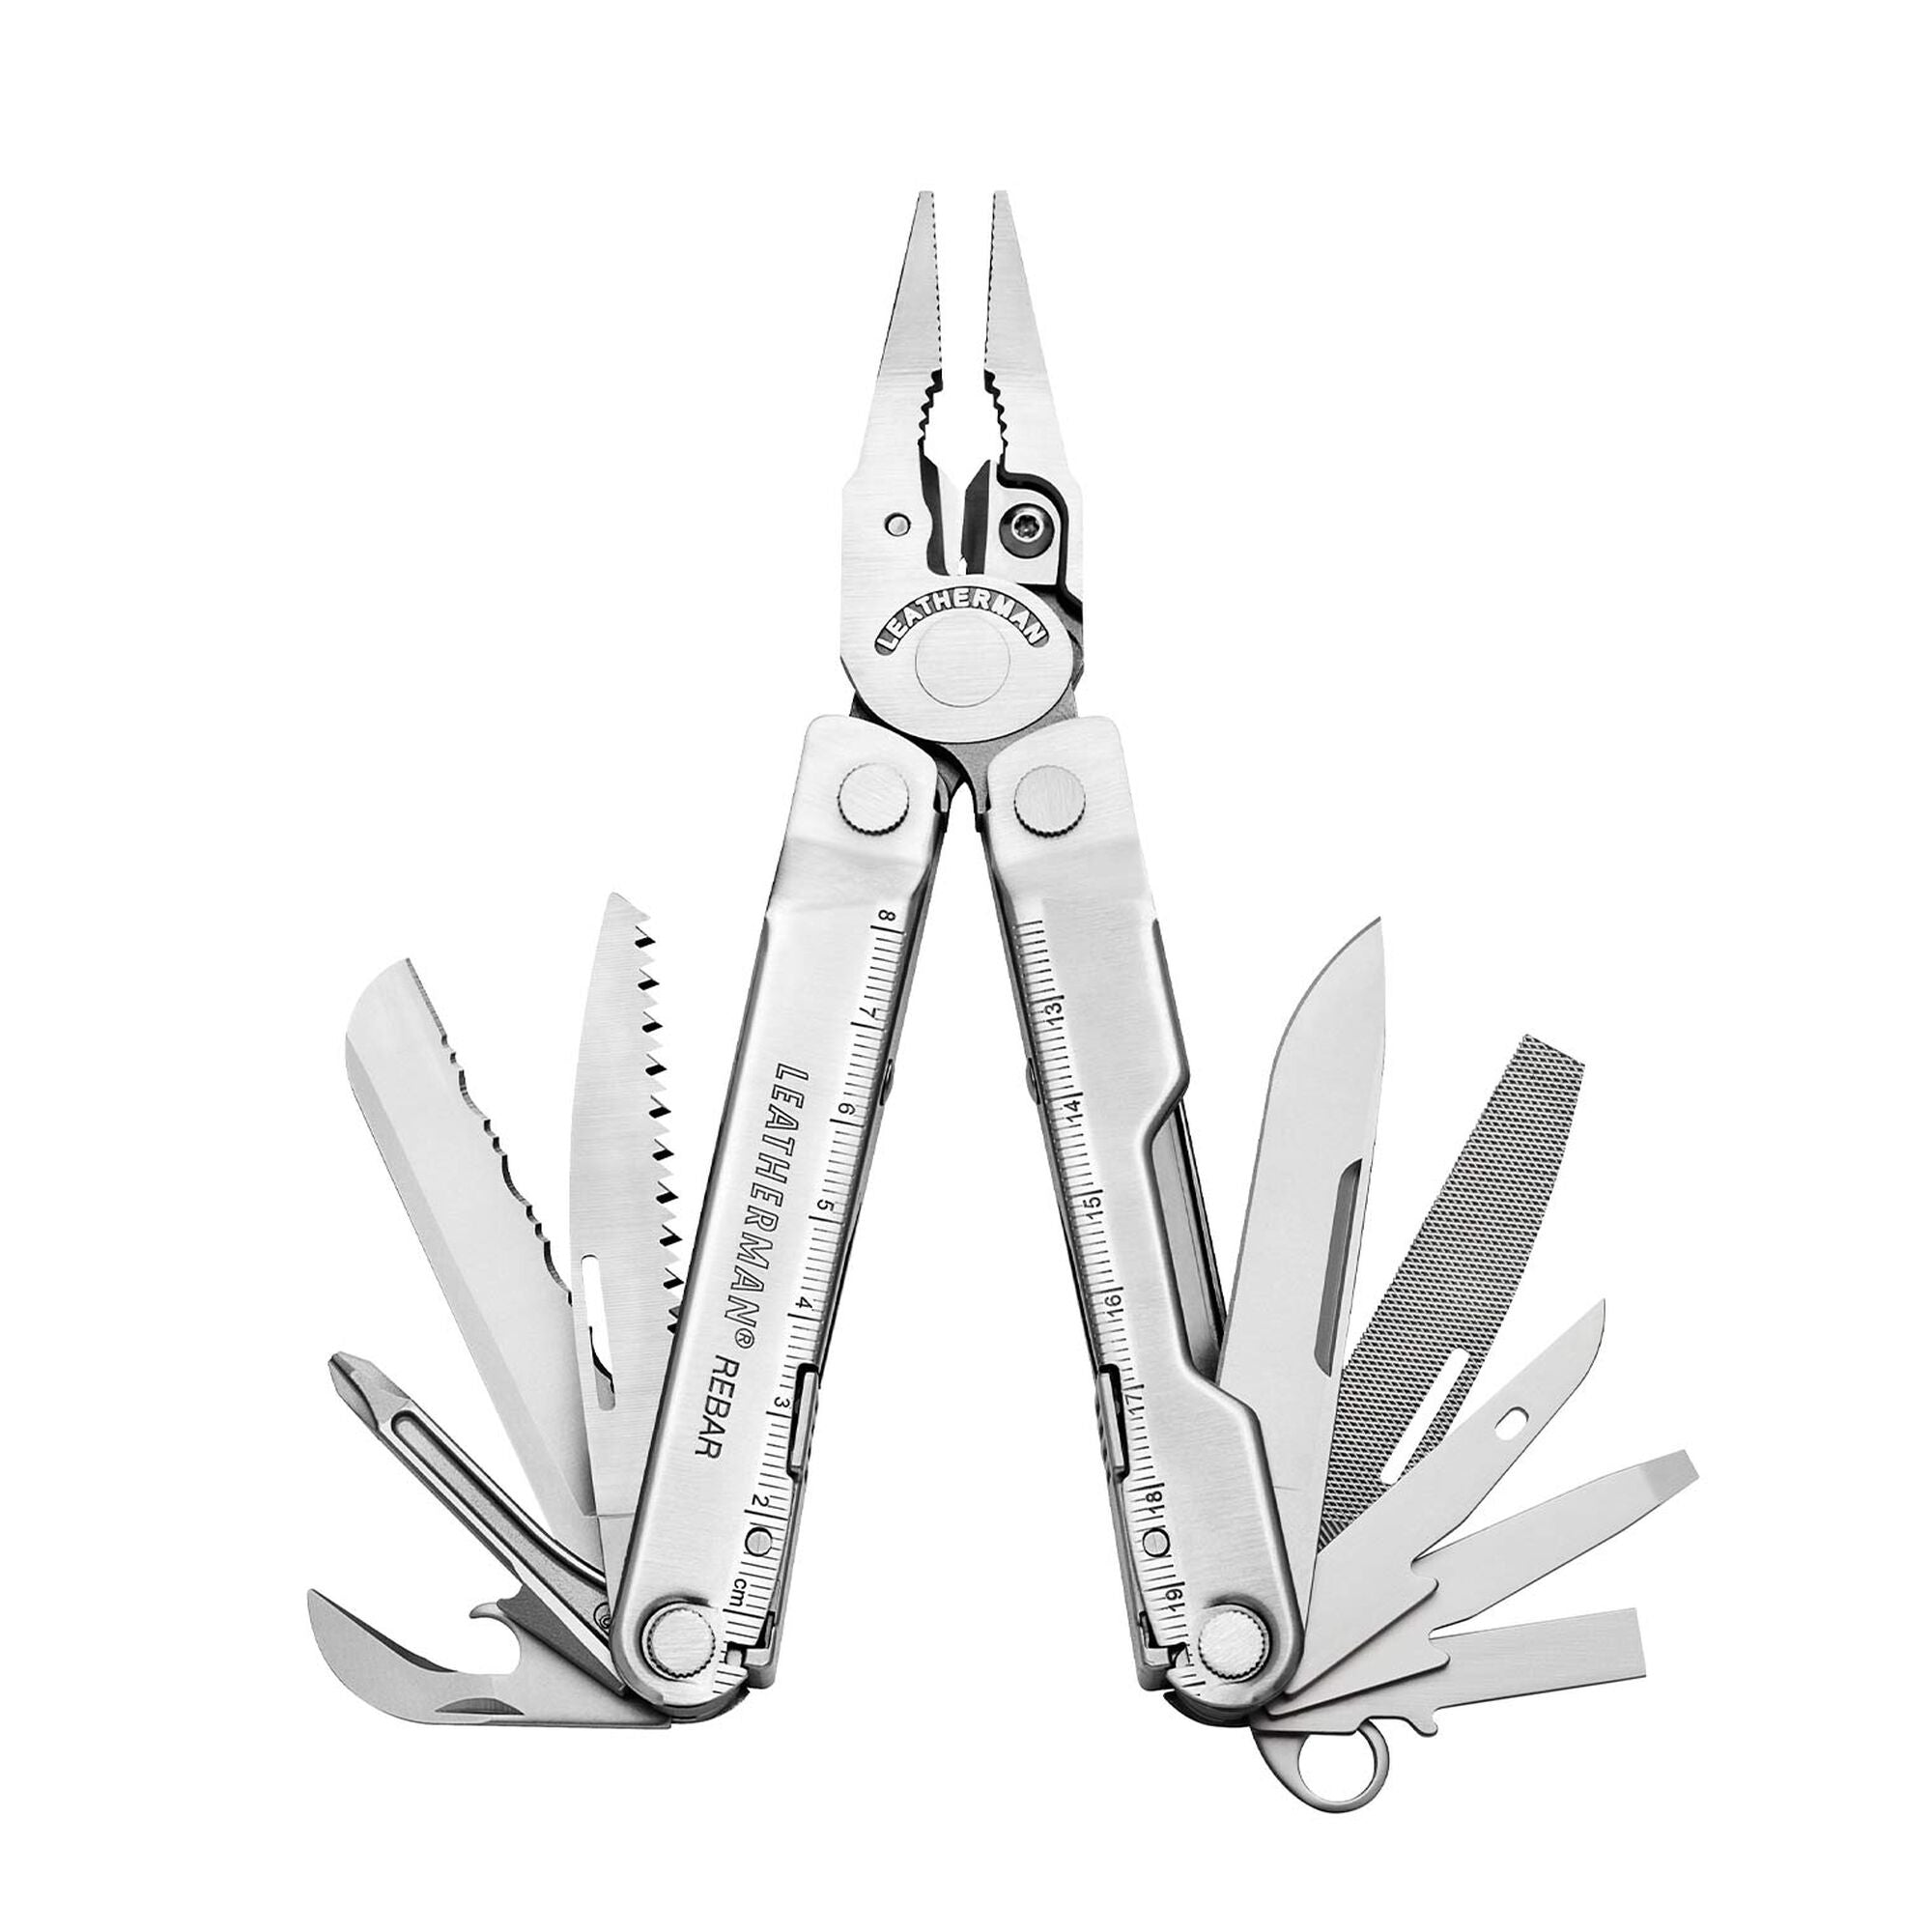 Leatherman Rebar With Sheath -  - Mansfield Hunting & Fishing - Products to prepare for Corona Virus